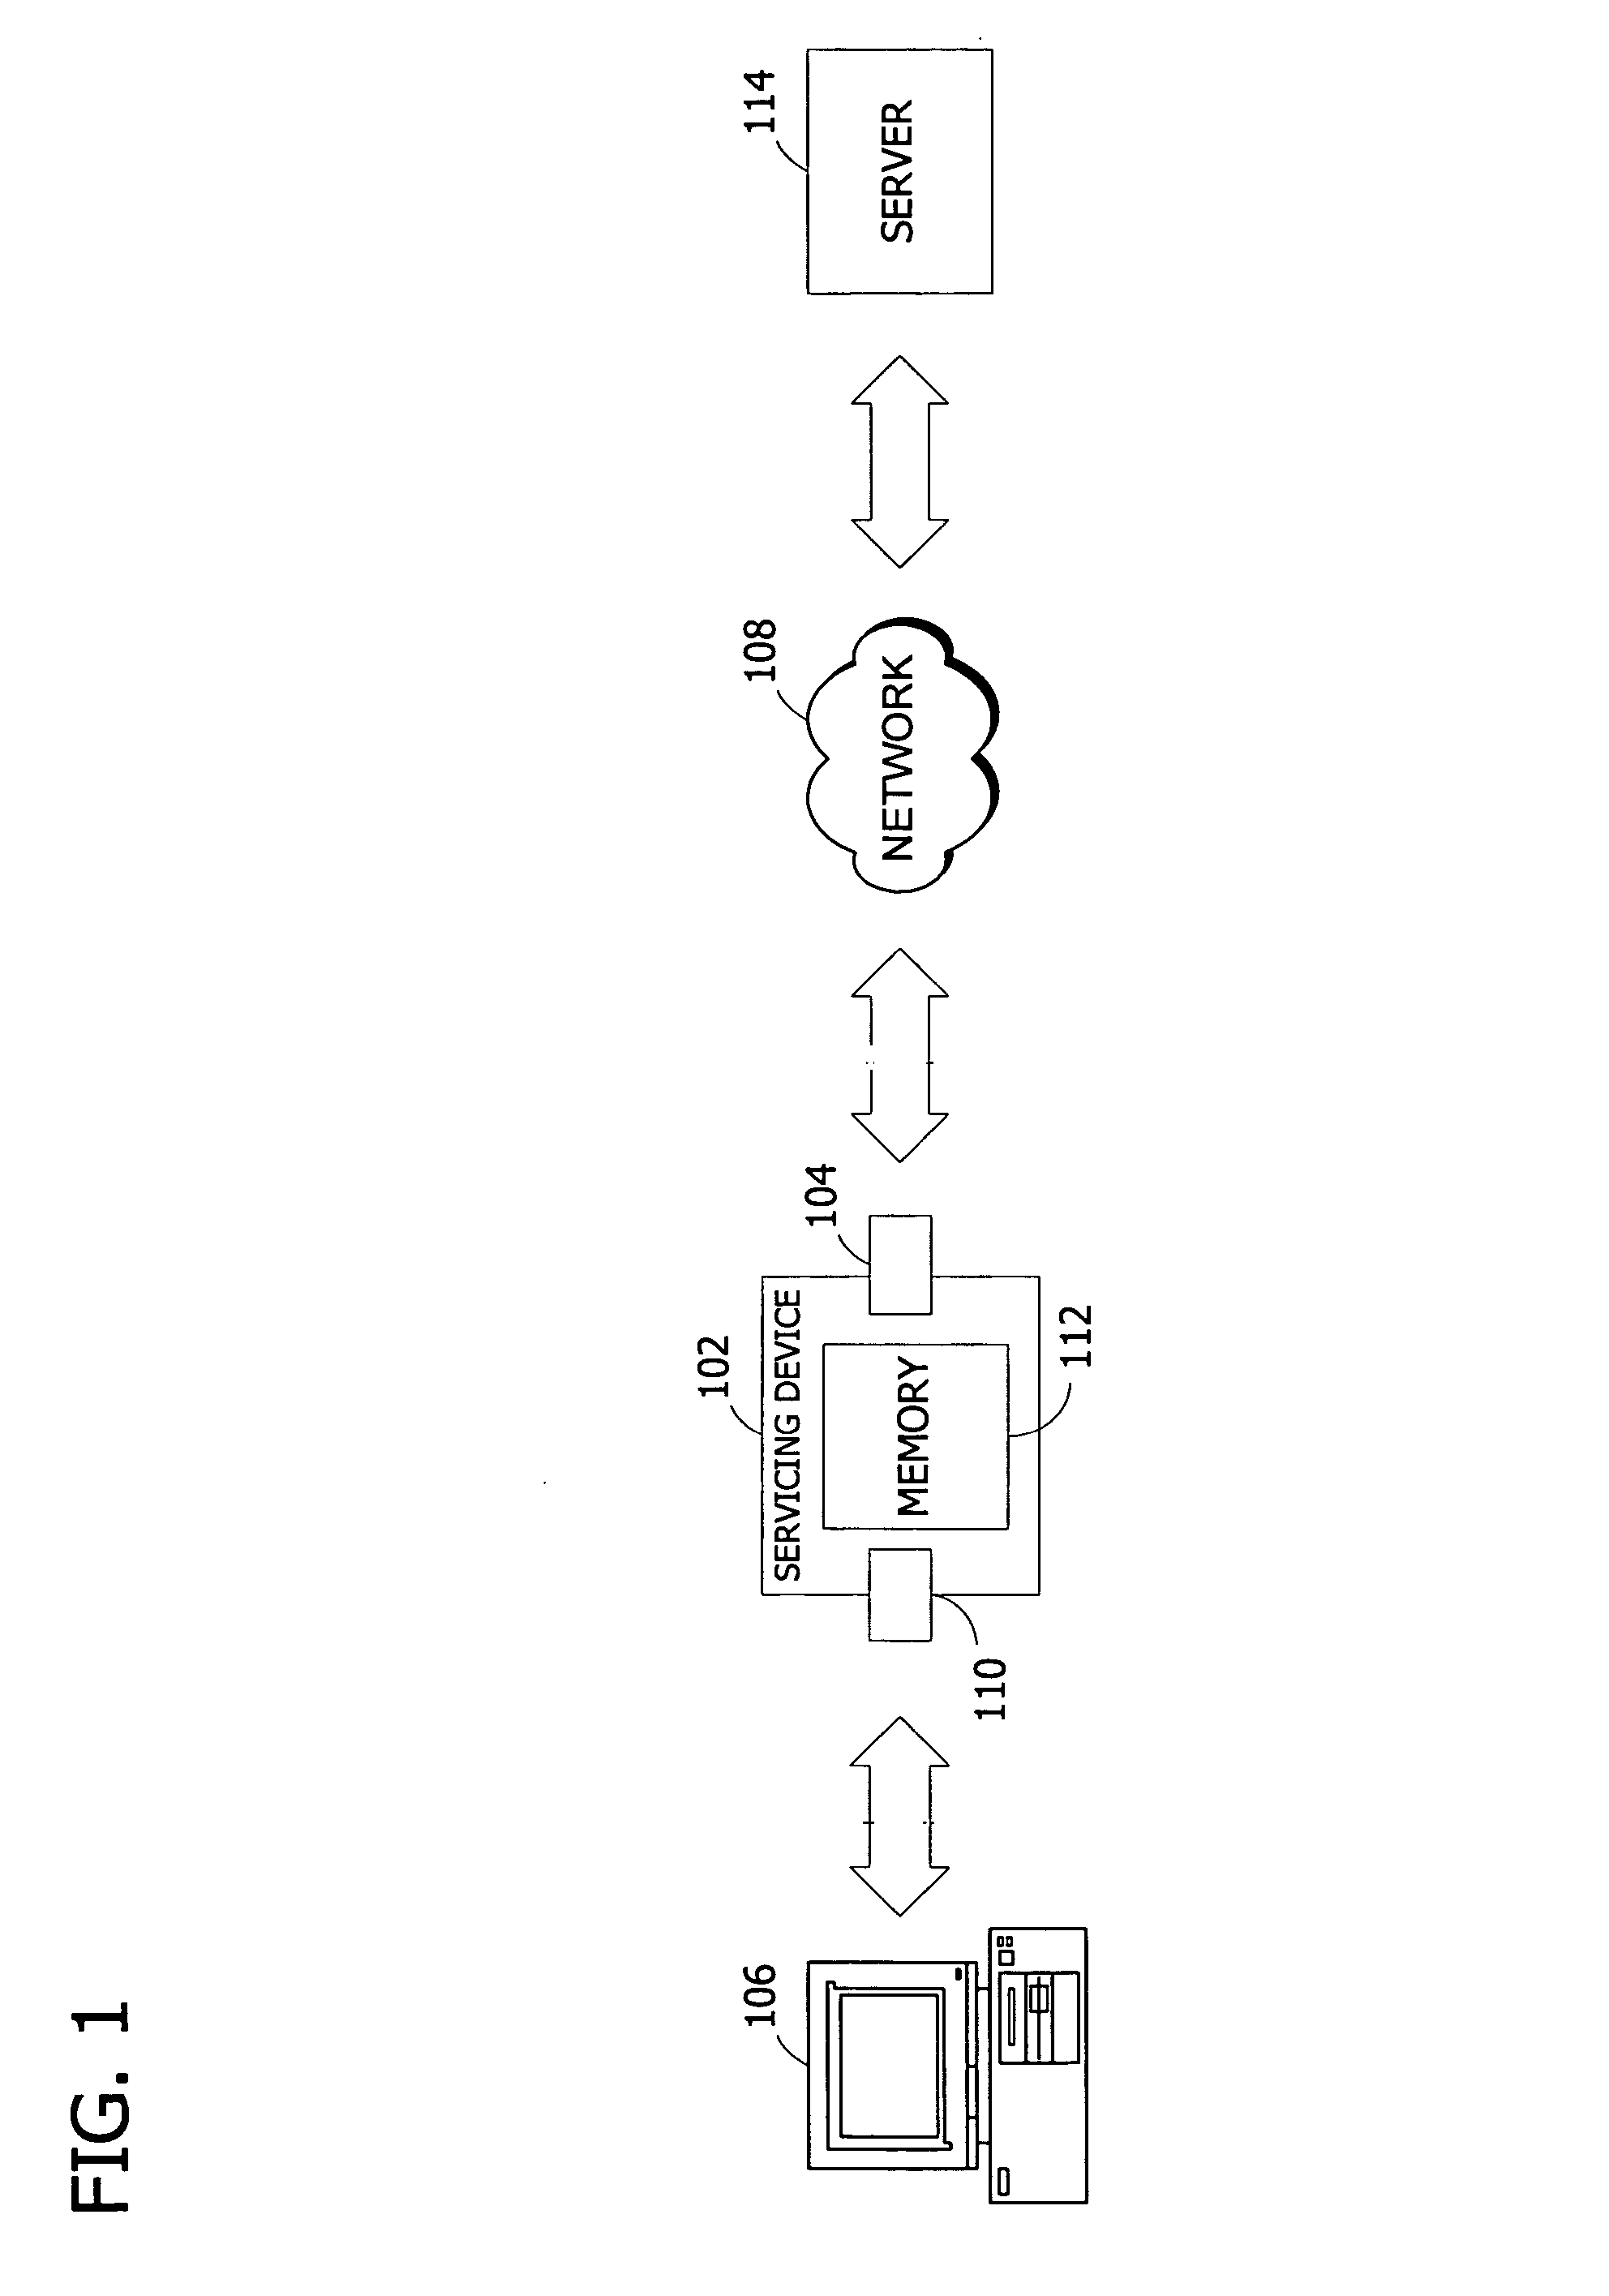 Self-contained computer servicing device